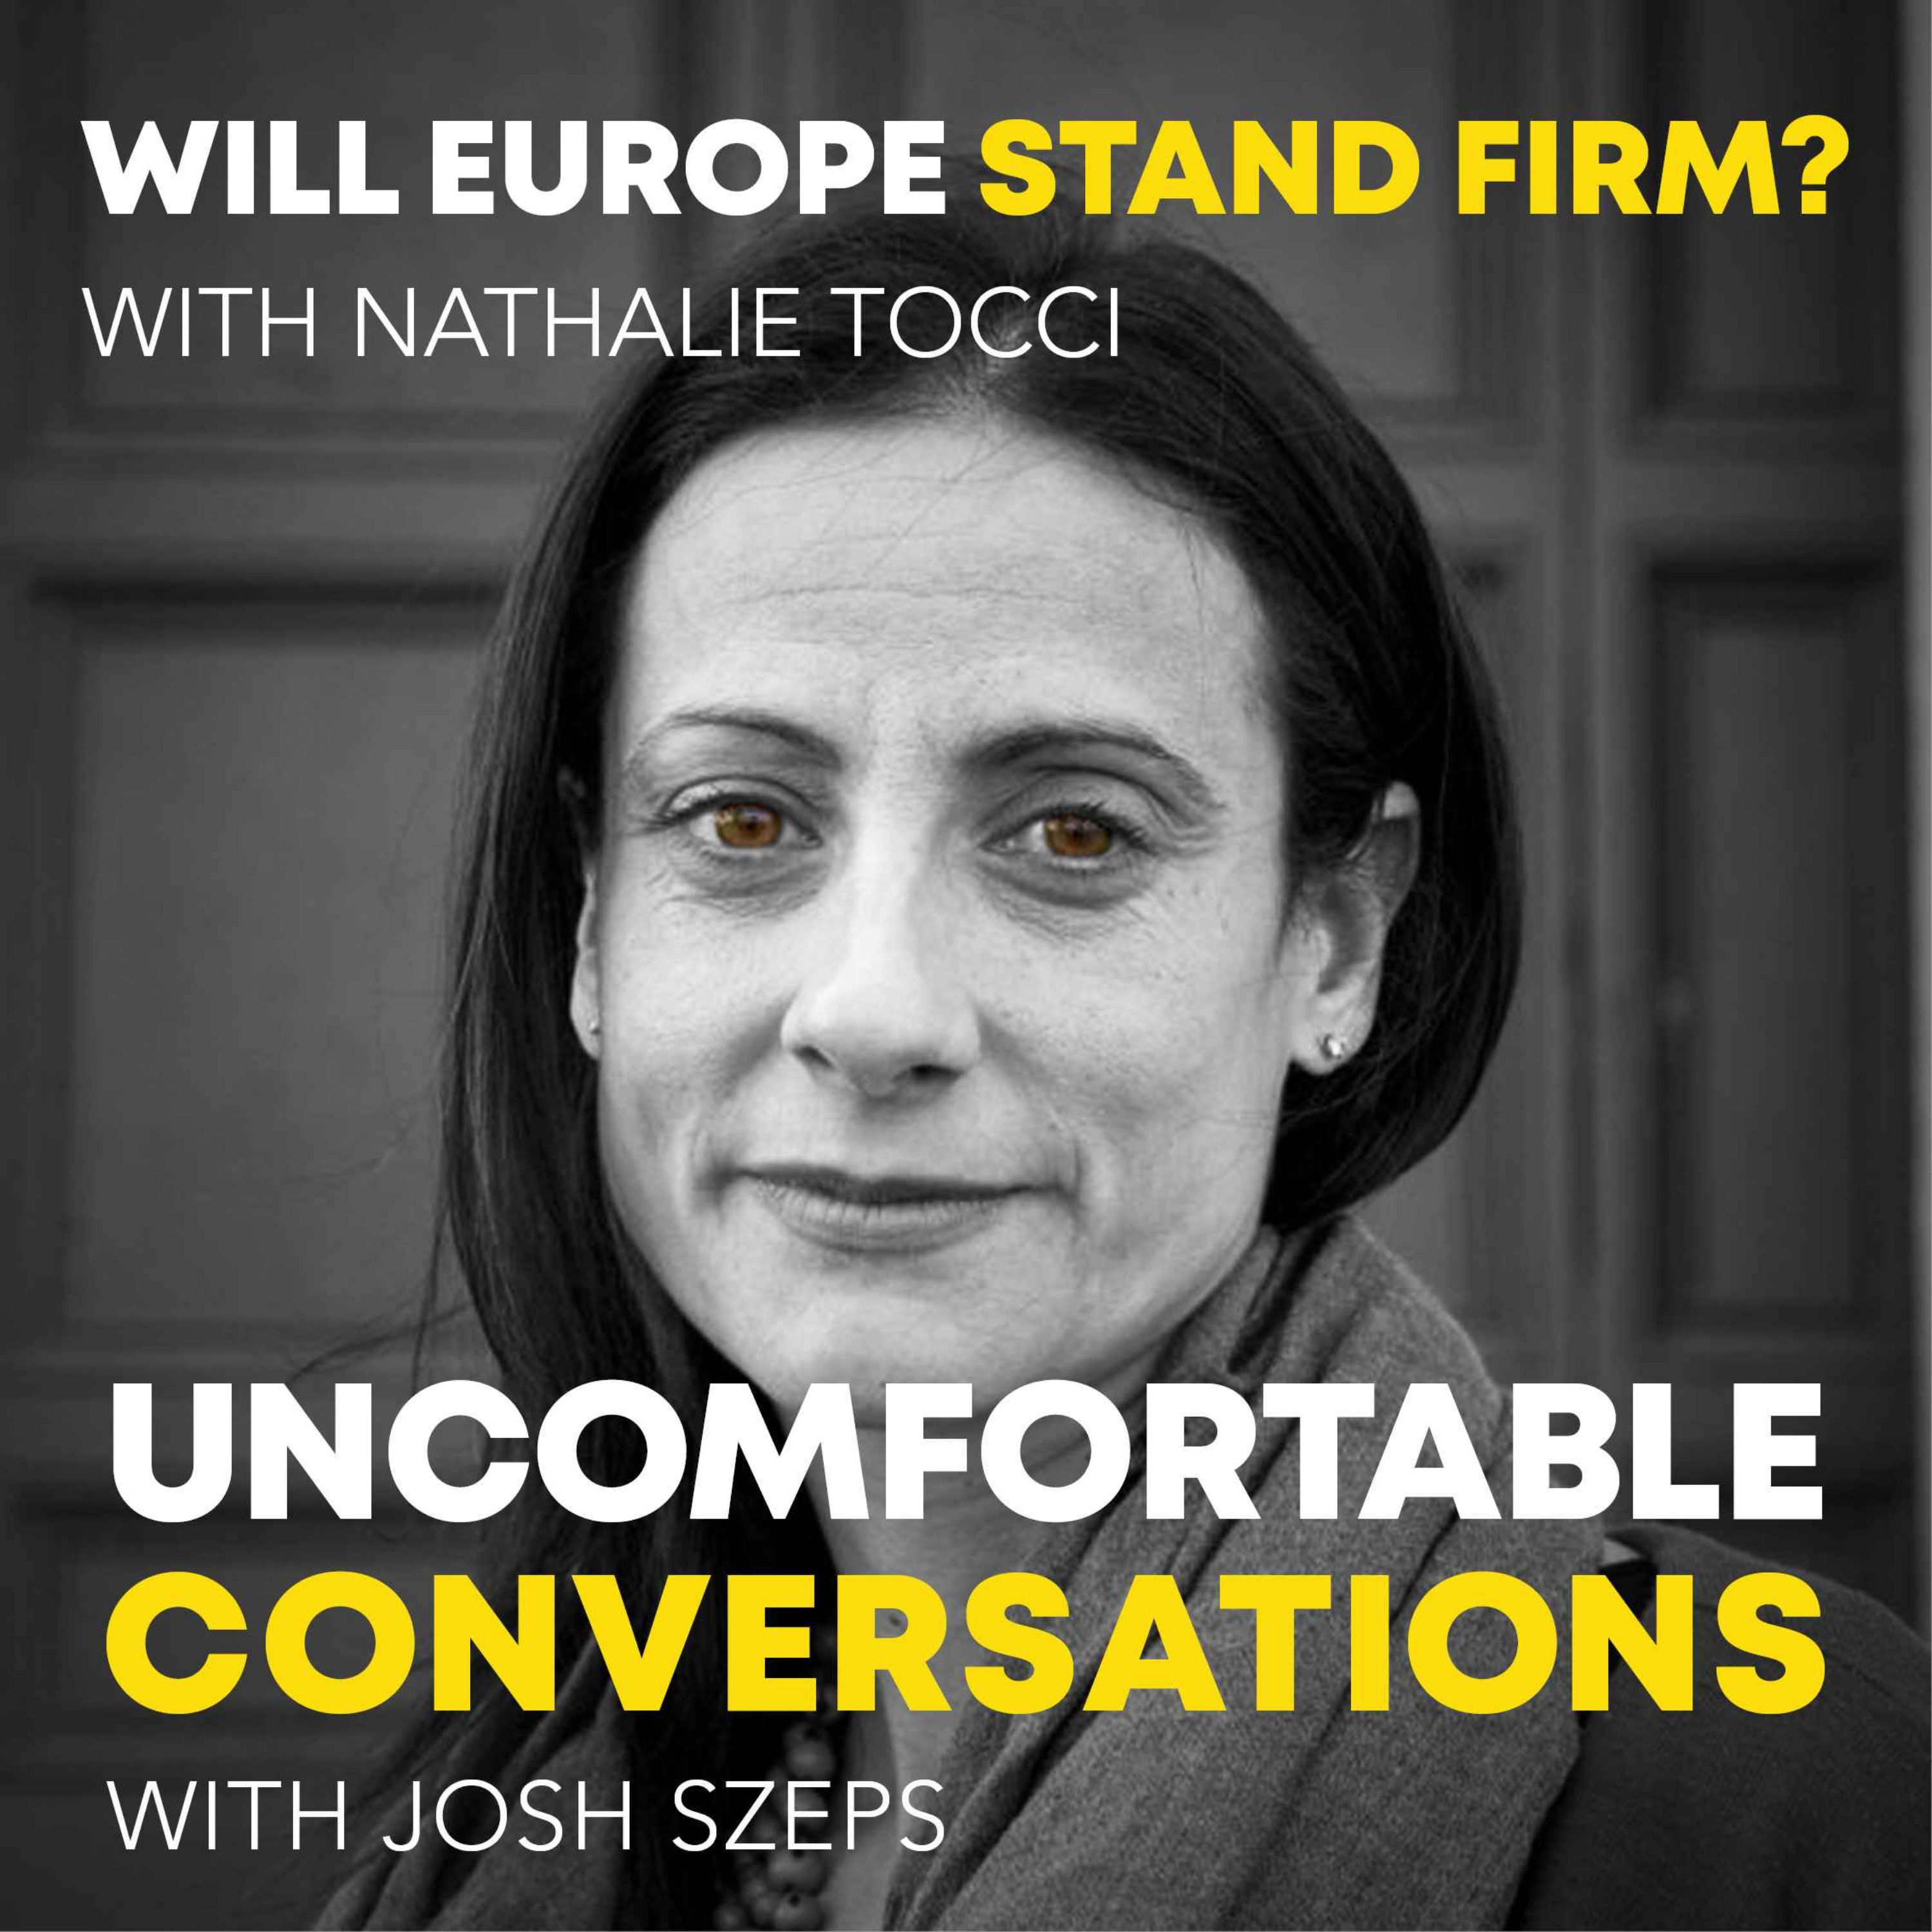 "Will Europe Stand Firm?" with Nathalie Tocci